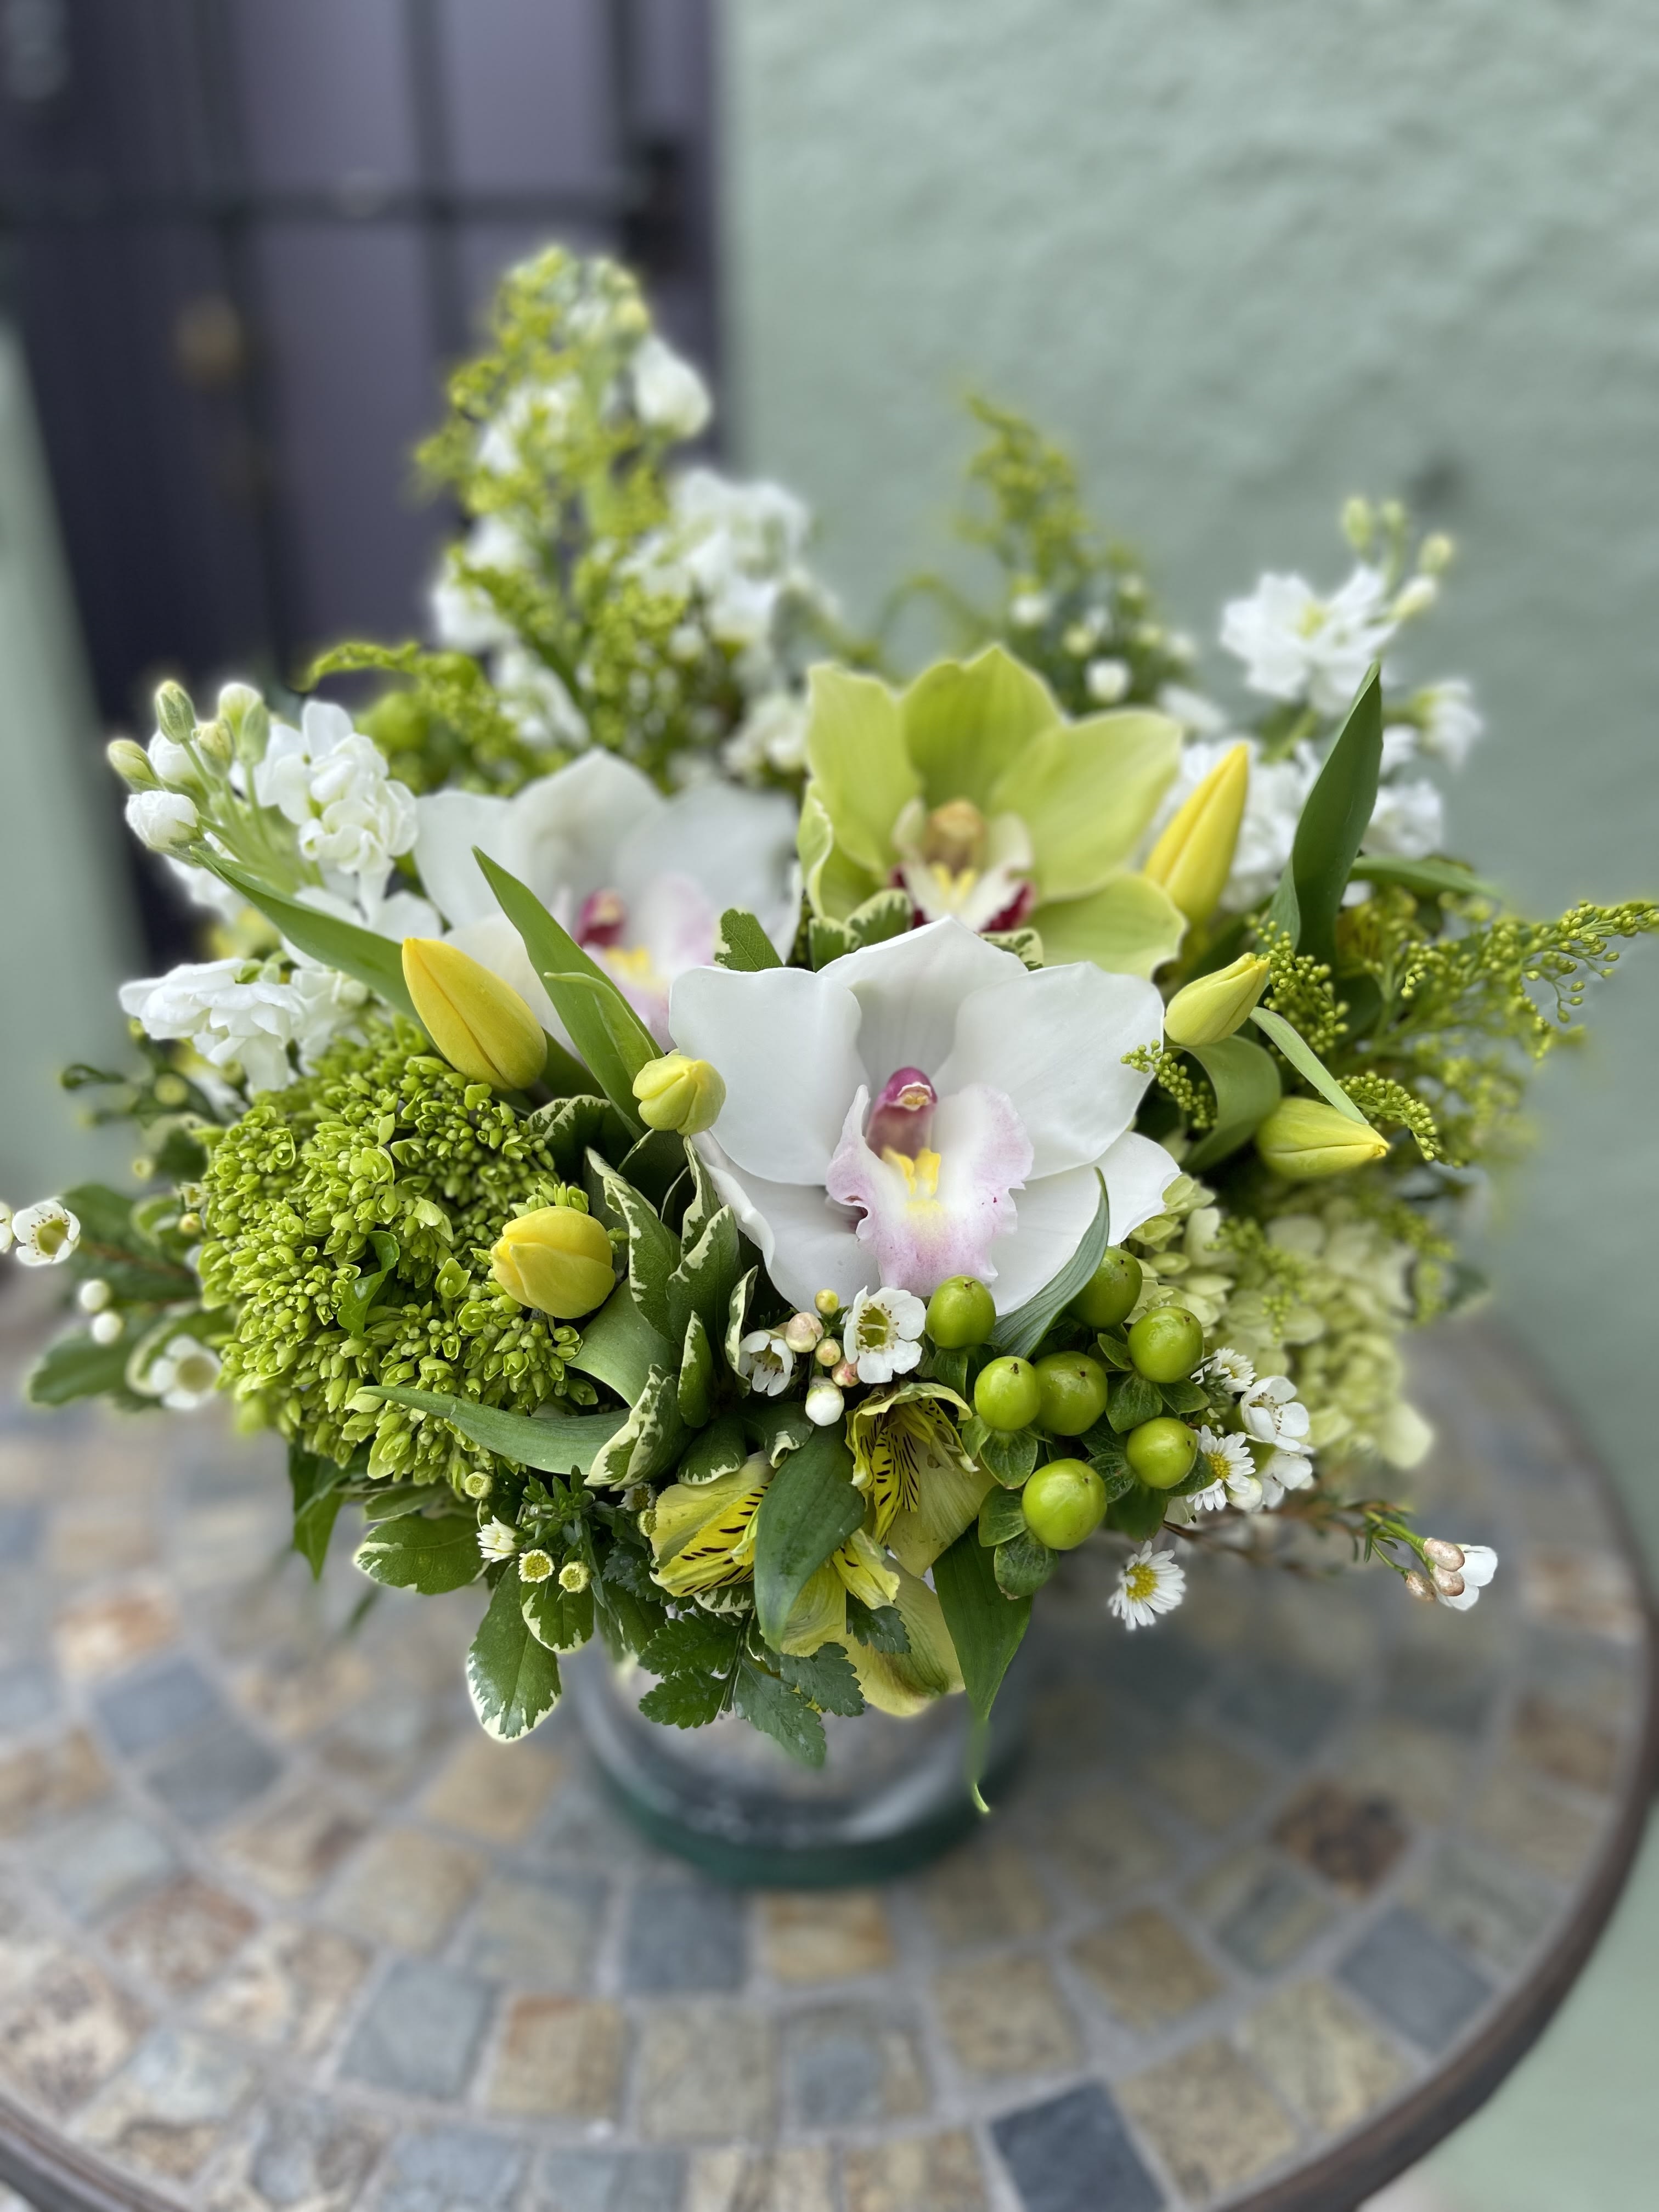 Sage - Wonderful touch of fresh green and yellow flowers such as cymbidium orchids, tulips, hypericum berries. Designed in a silver mercury glassware. It would be nice centerpiece as multiple of this as well.